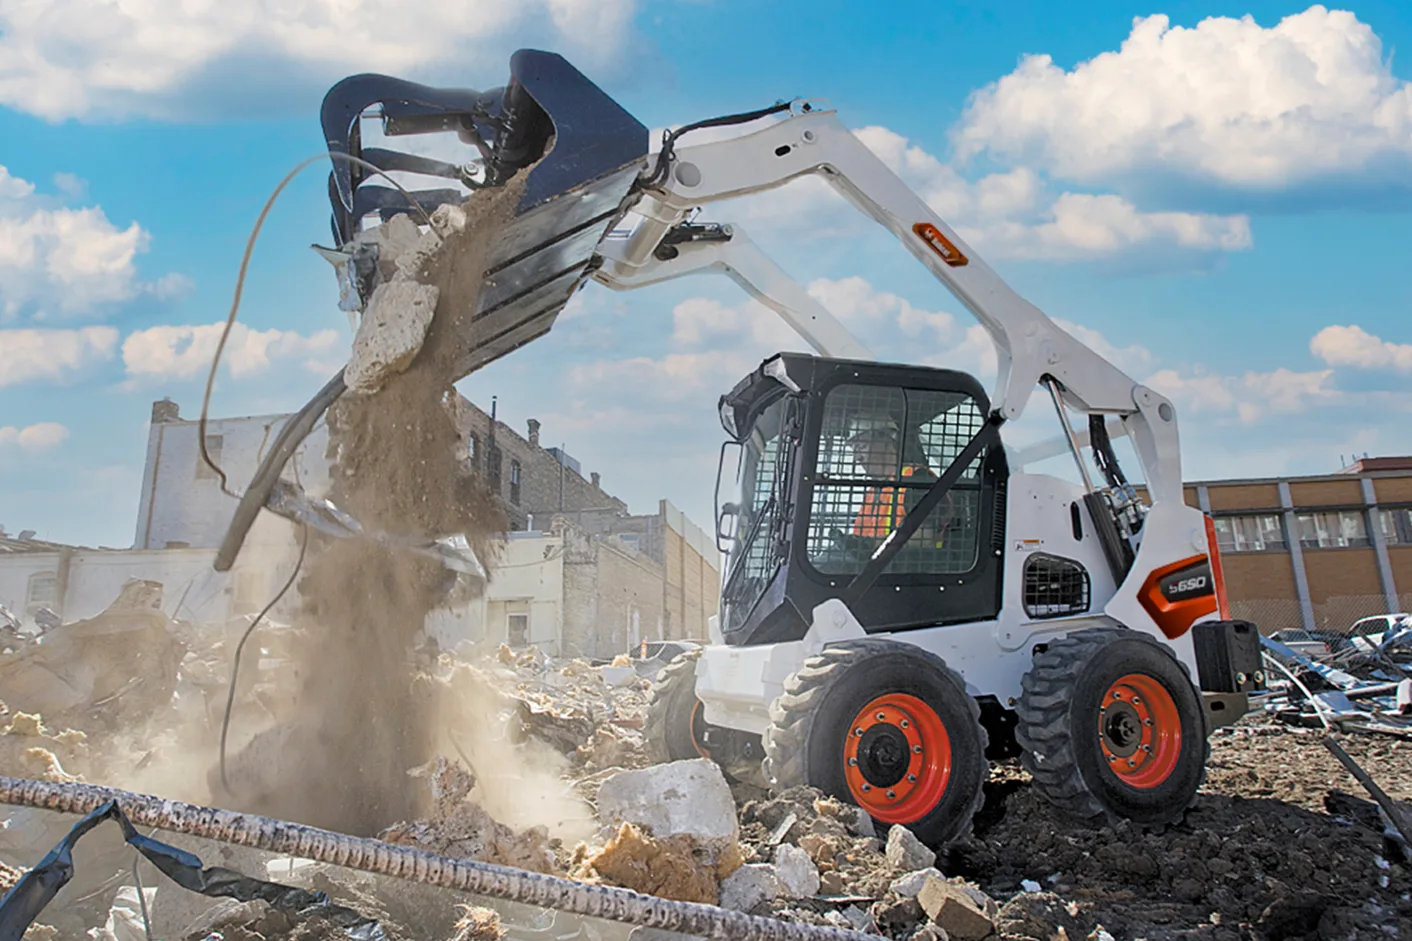 Browse Specs and more for the Bobcat S650 Skid-Steer Loader - Bobcat of North Texas